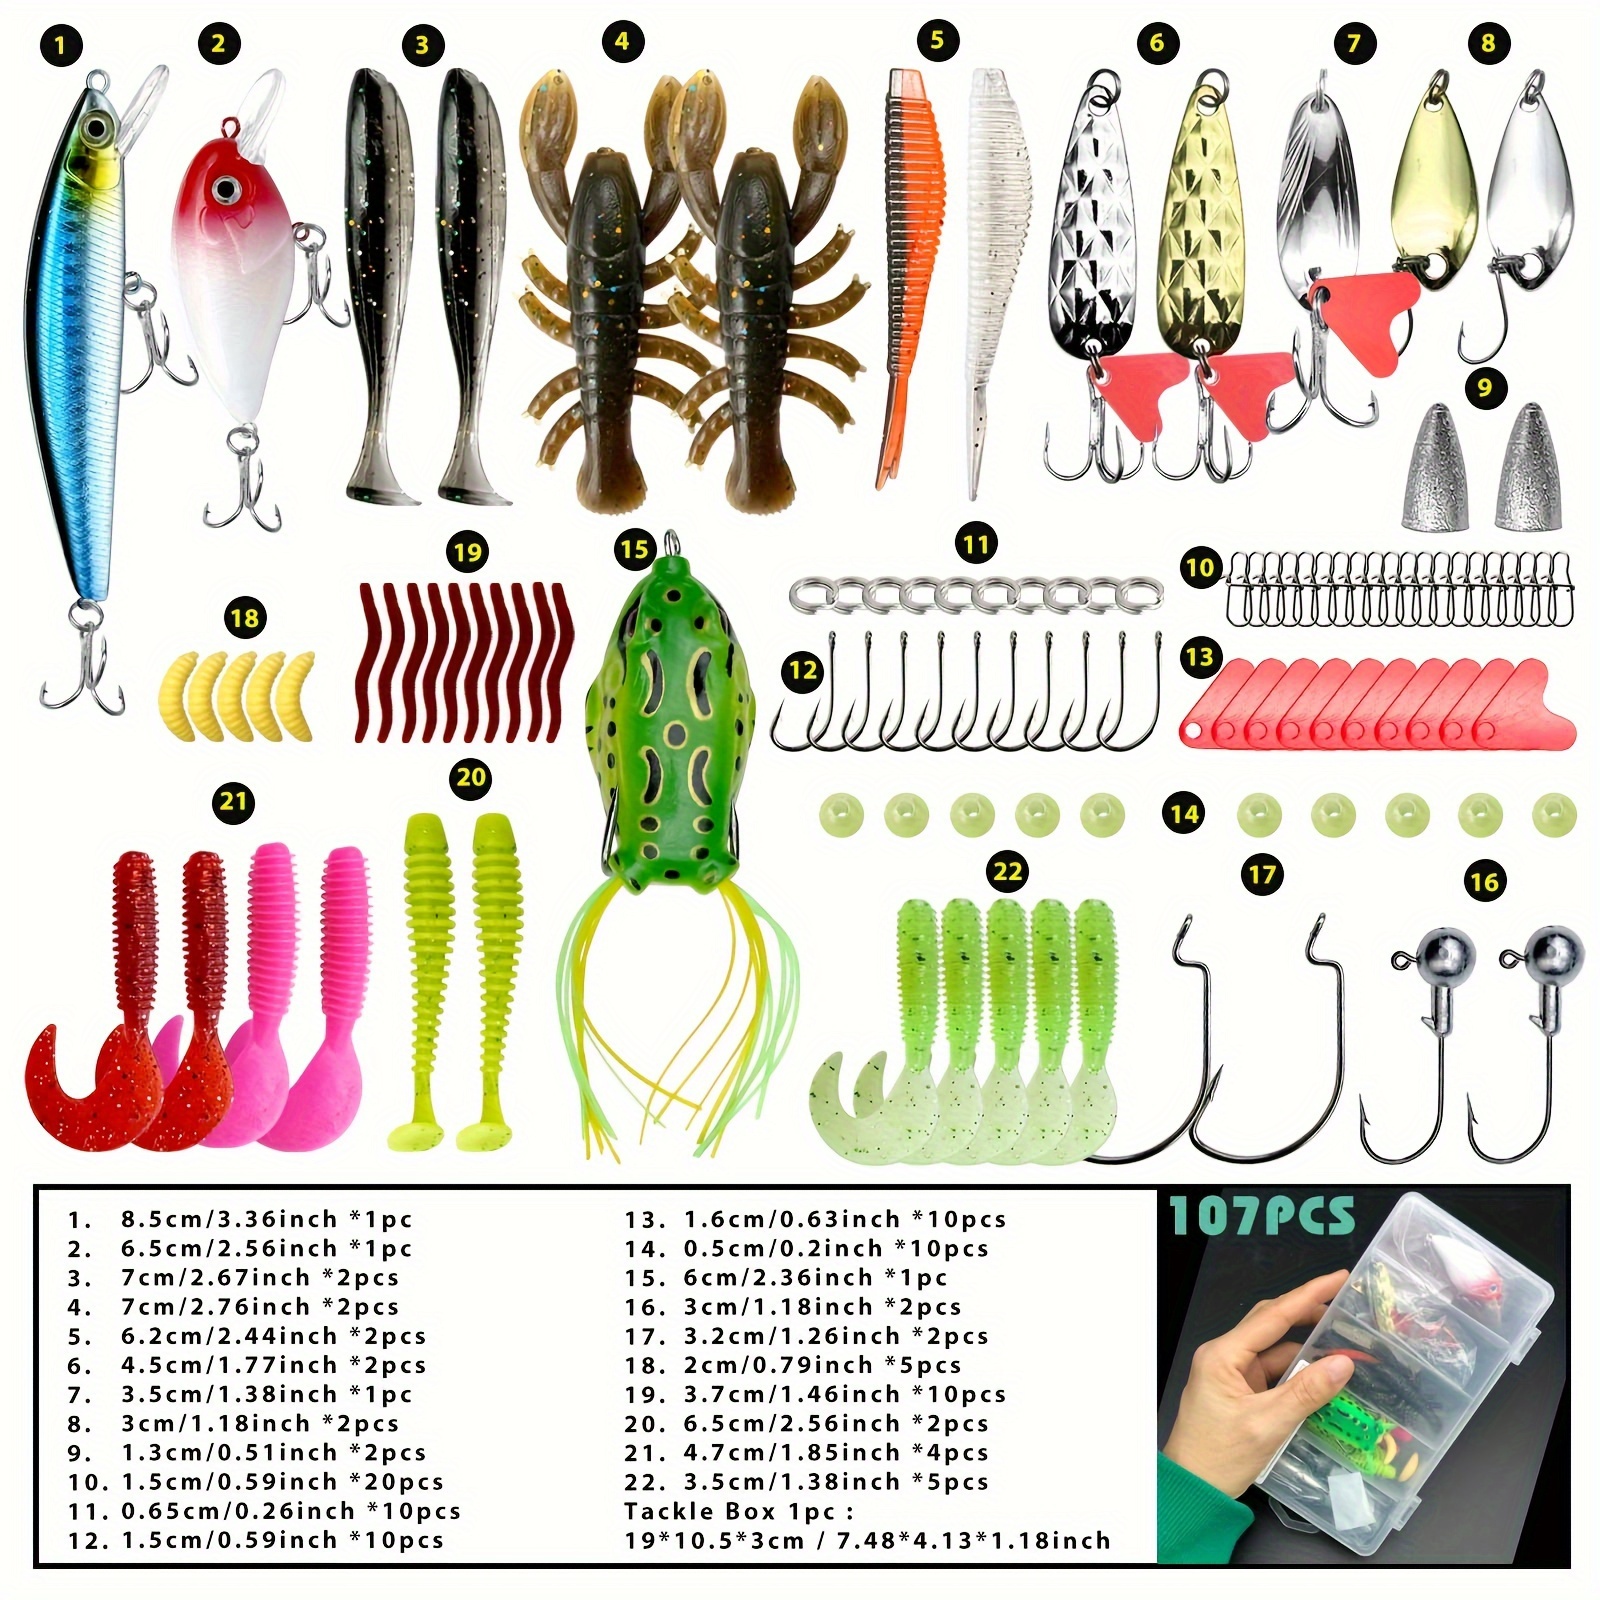 26 107 132 284pcs fishing lures kit tackle box with hard lures spoon lures soft plastic worms swimbaits crankbait jigs hooks for bass trout salmon fishing details 7